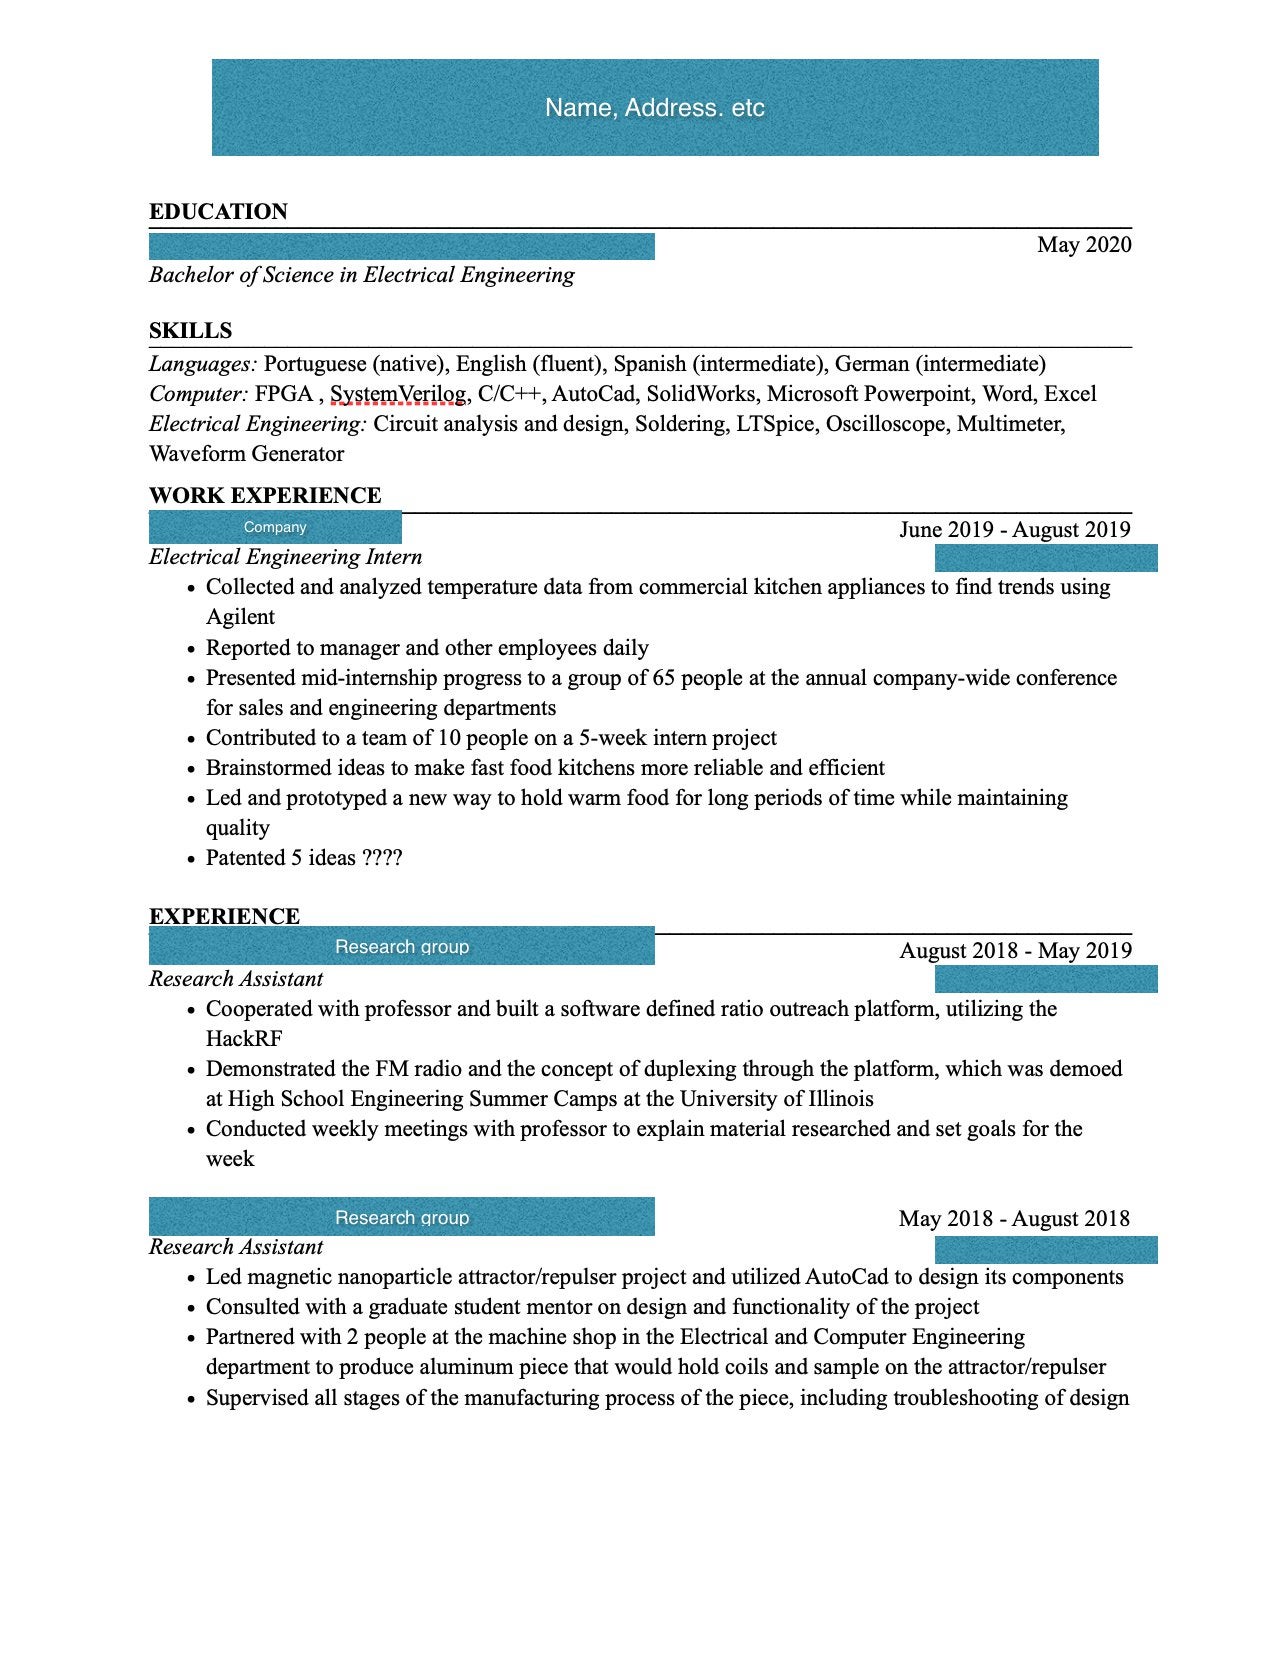 How to mention patent on resume : Resume